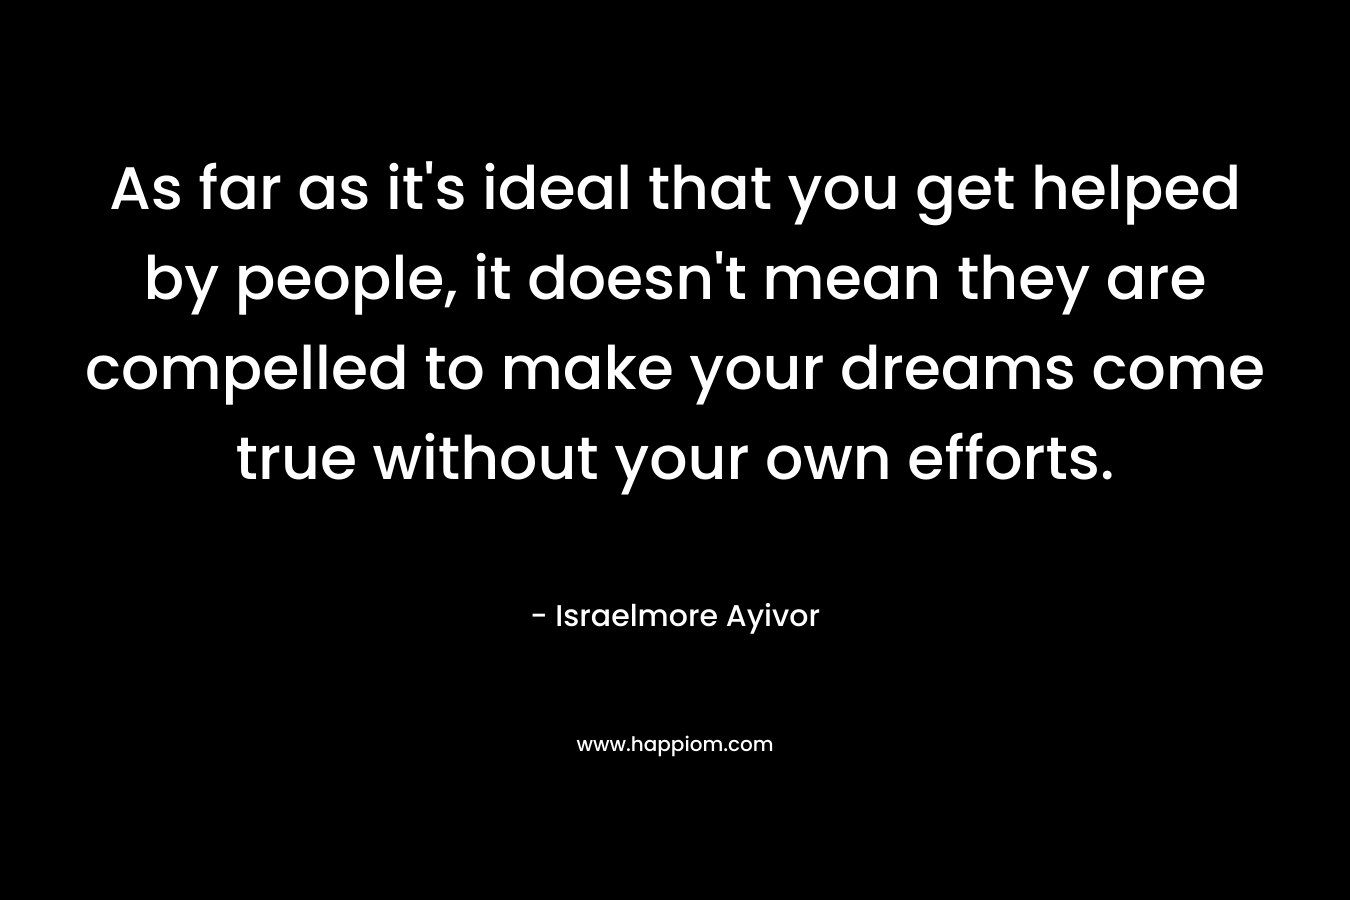 As far as it’s ideal that you get helped by people, it doesn’t mean they are compelled to make your dreams come true without your own efforts. – Israelmore Ayivor